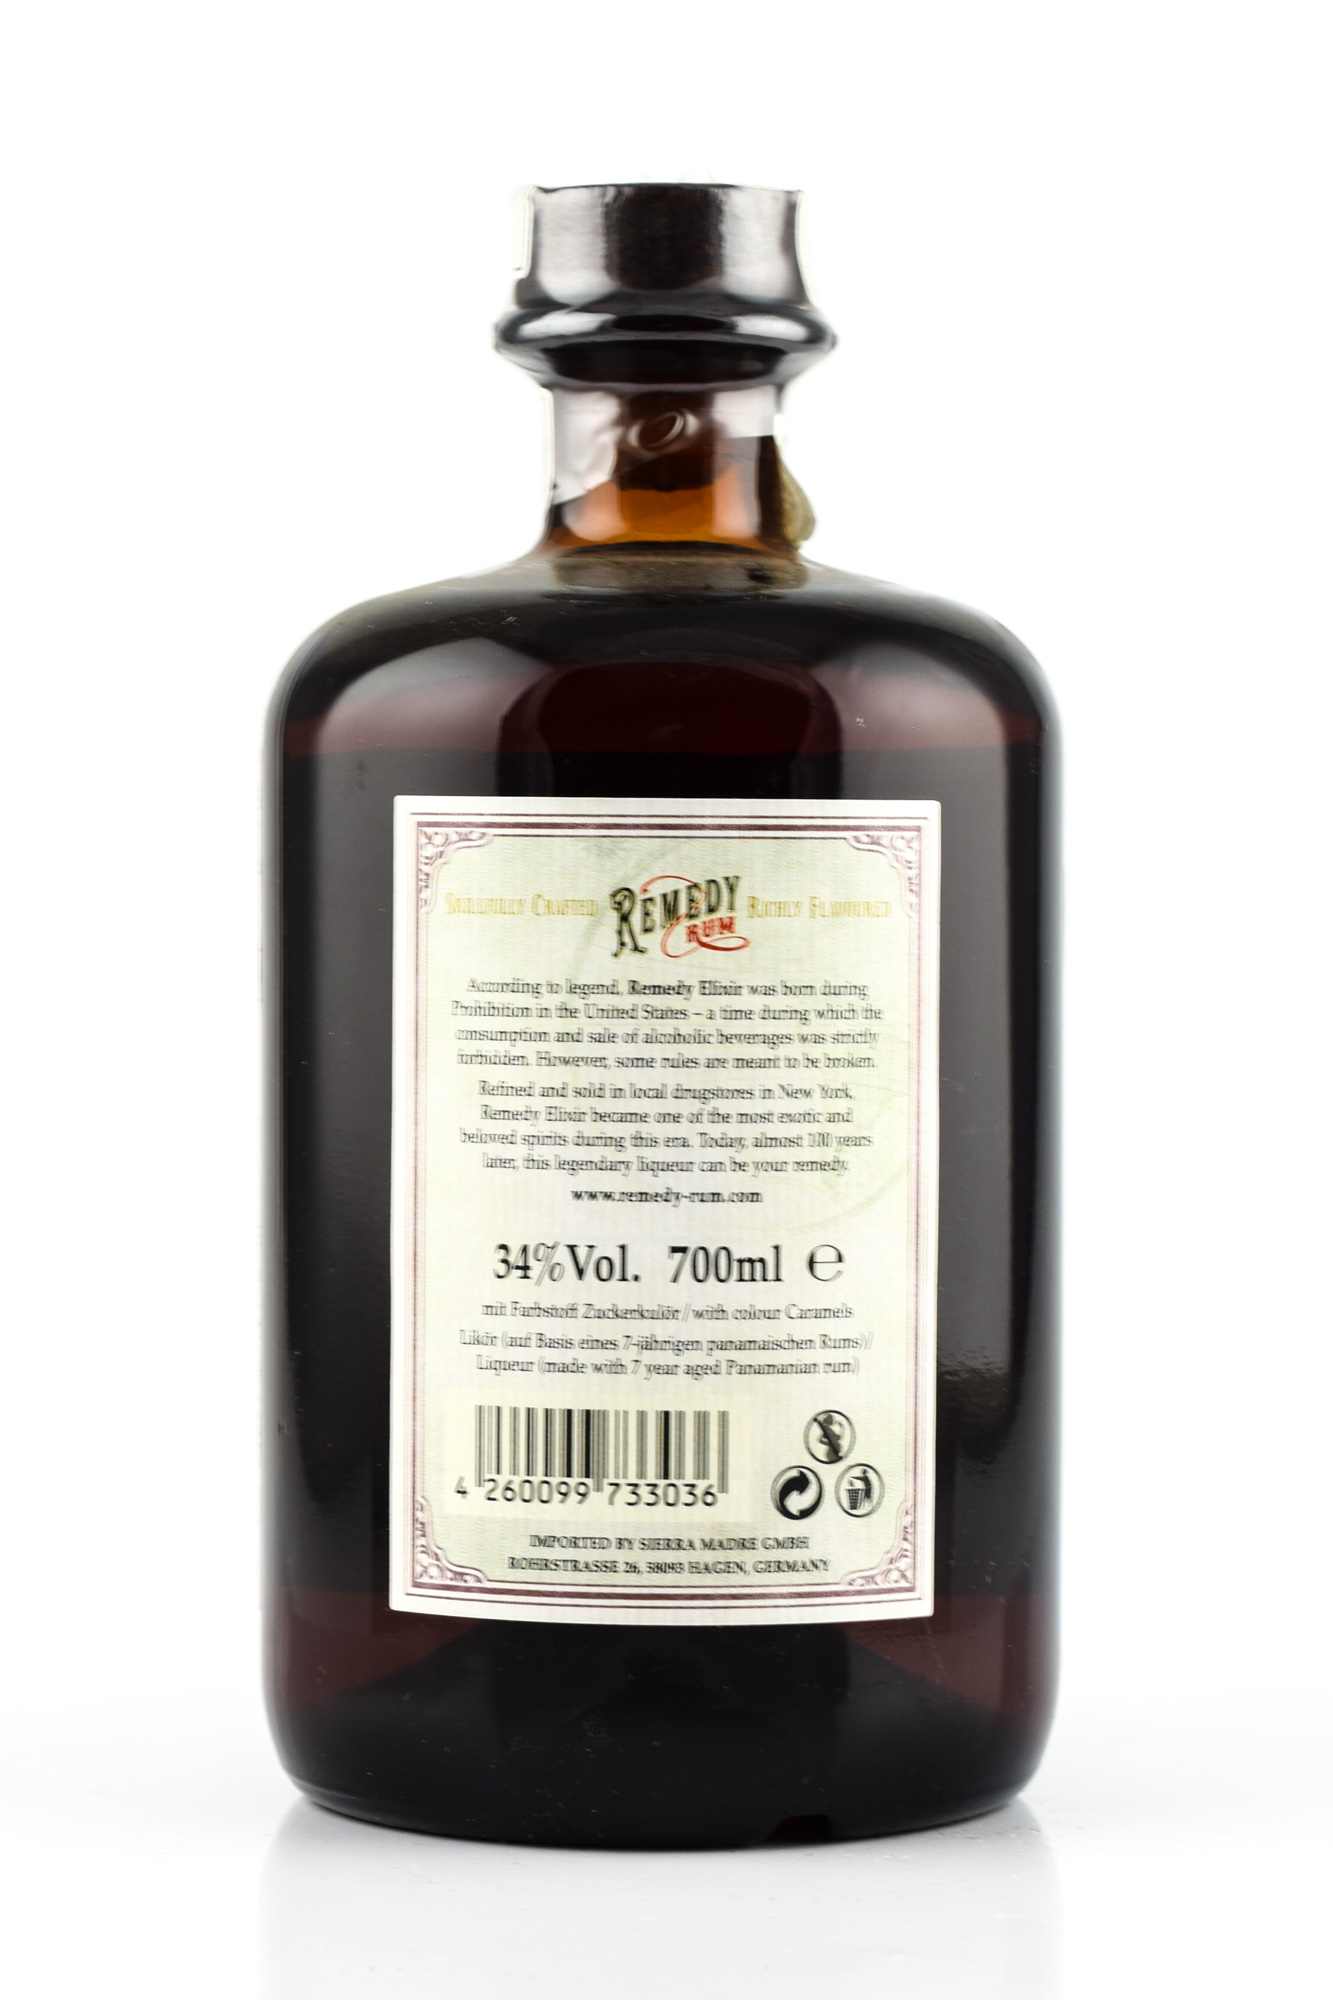 Remedy Elixir | >> Malts Home of Home Malts now! at explore of